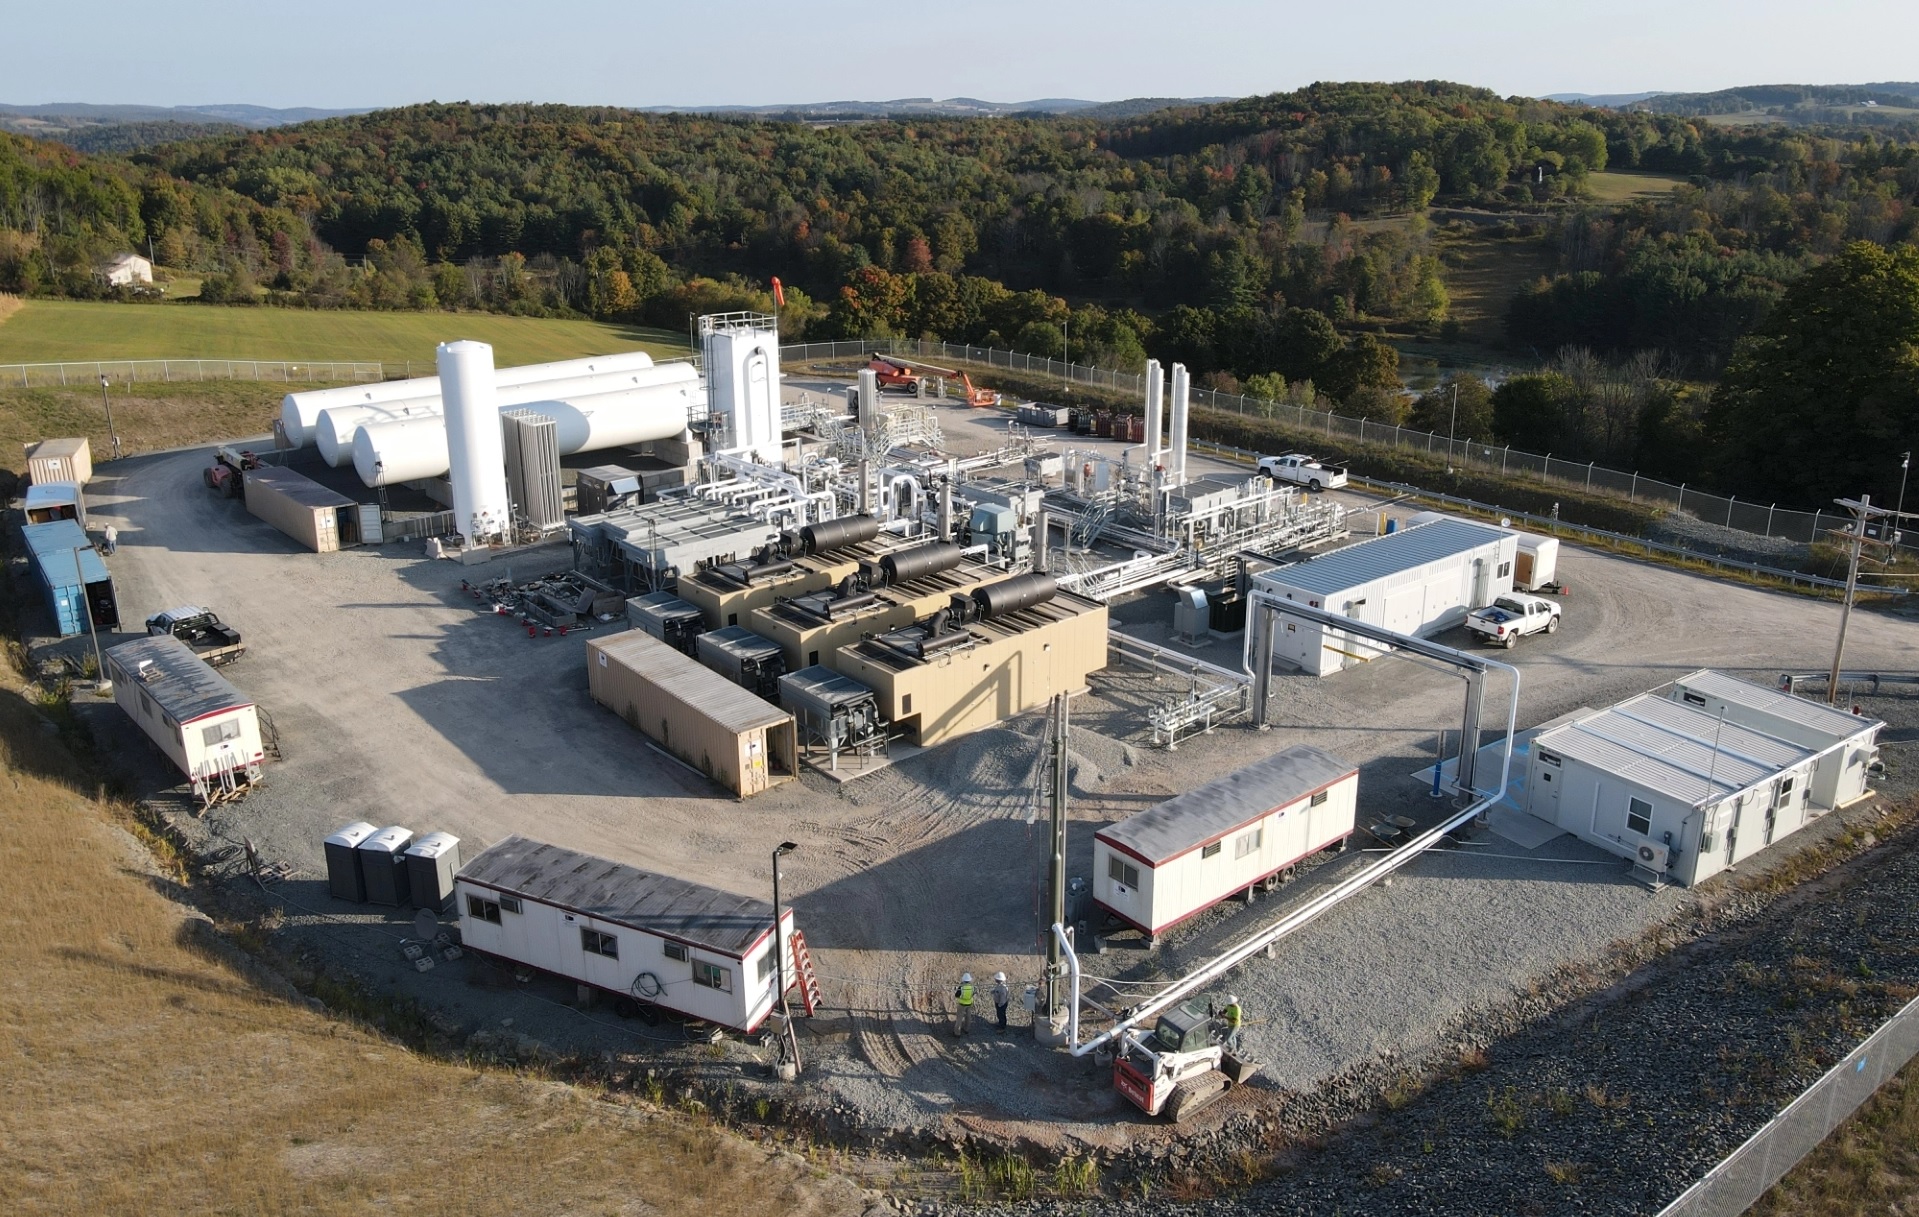 Pivotal LNG expands with new Towanda LNG facility